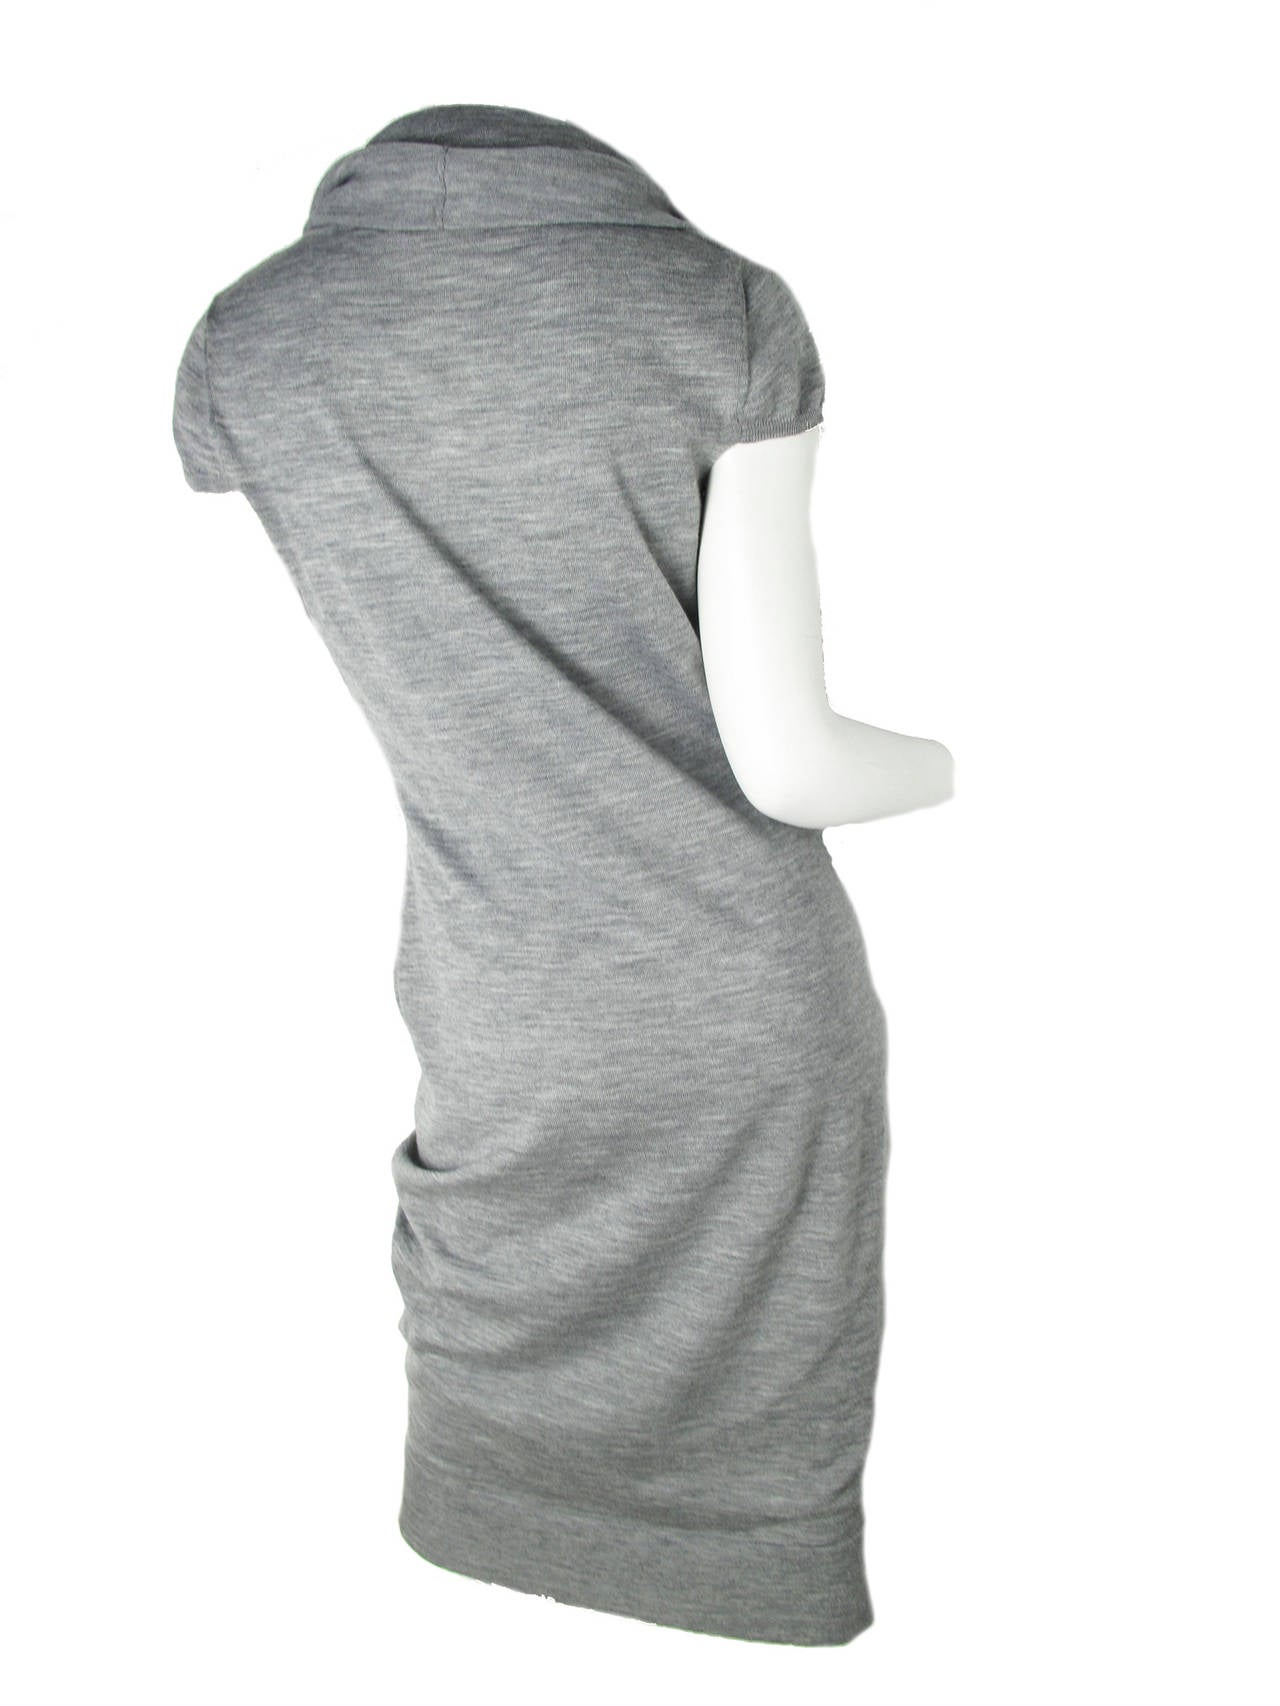 Alexander McQueen Grey Dress with Large Cowl Neck In Excellent Condition In Austin, TX